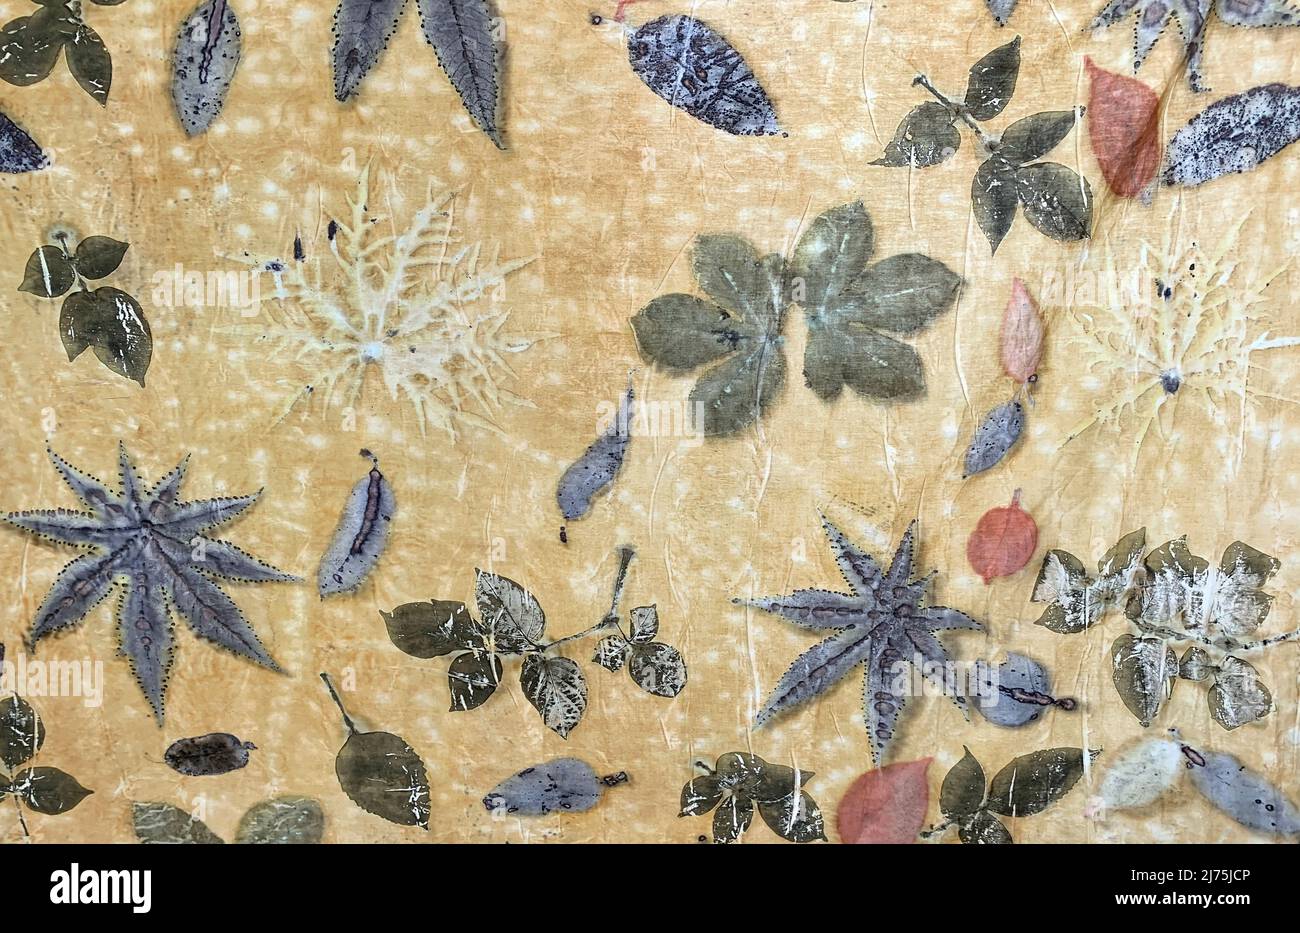 Yogyakarta, Indonesia - December 11, 2021: Eco print, making a motif with leaves and flowers on a piece of cloth, in Yogyakarta, Indonesia Stock Photo